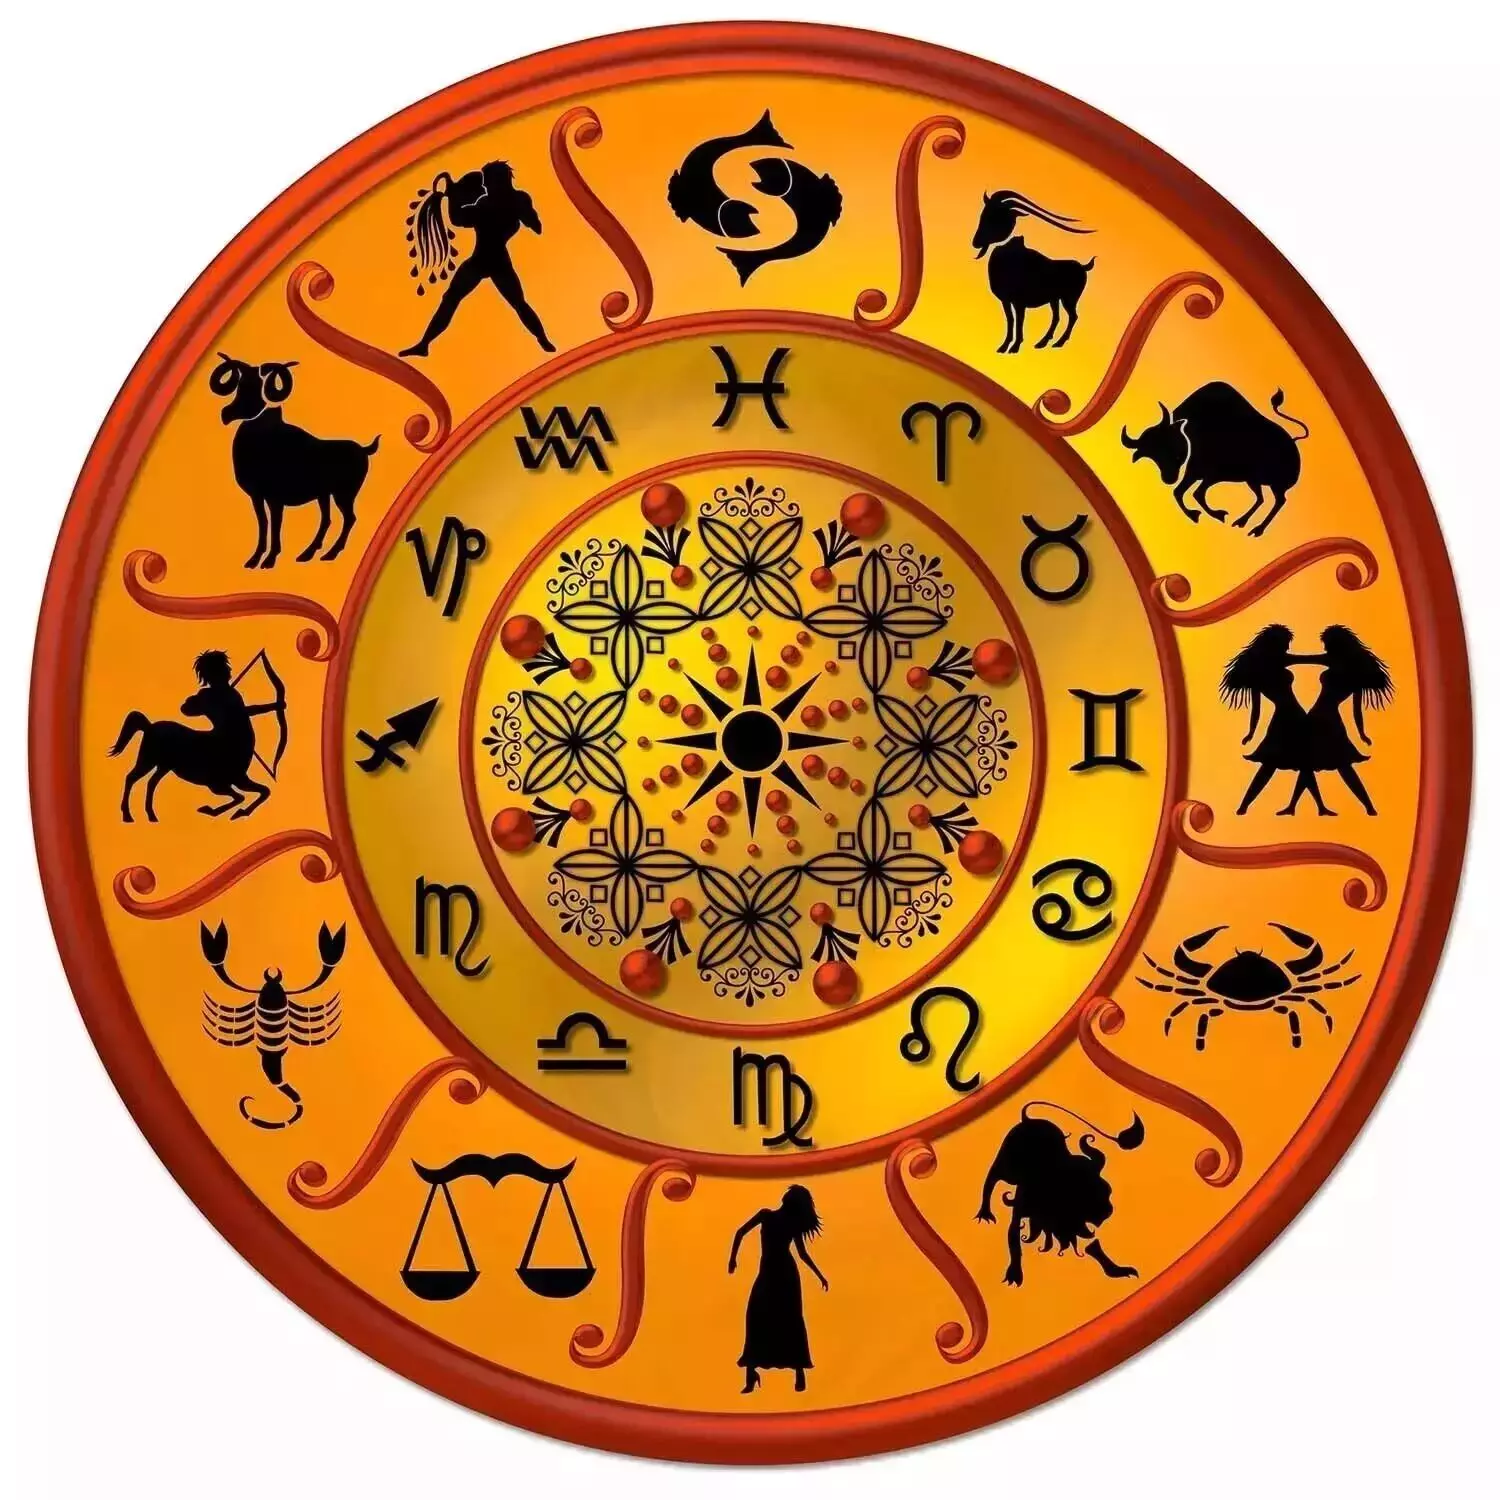 21 March  – Know your todays horoscope